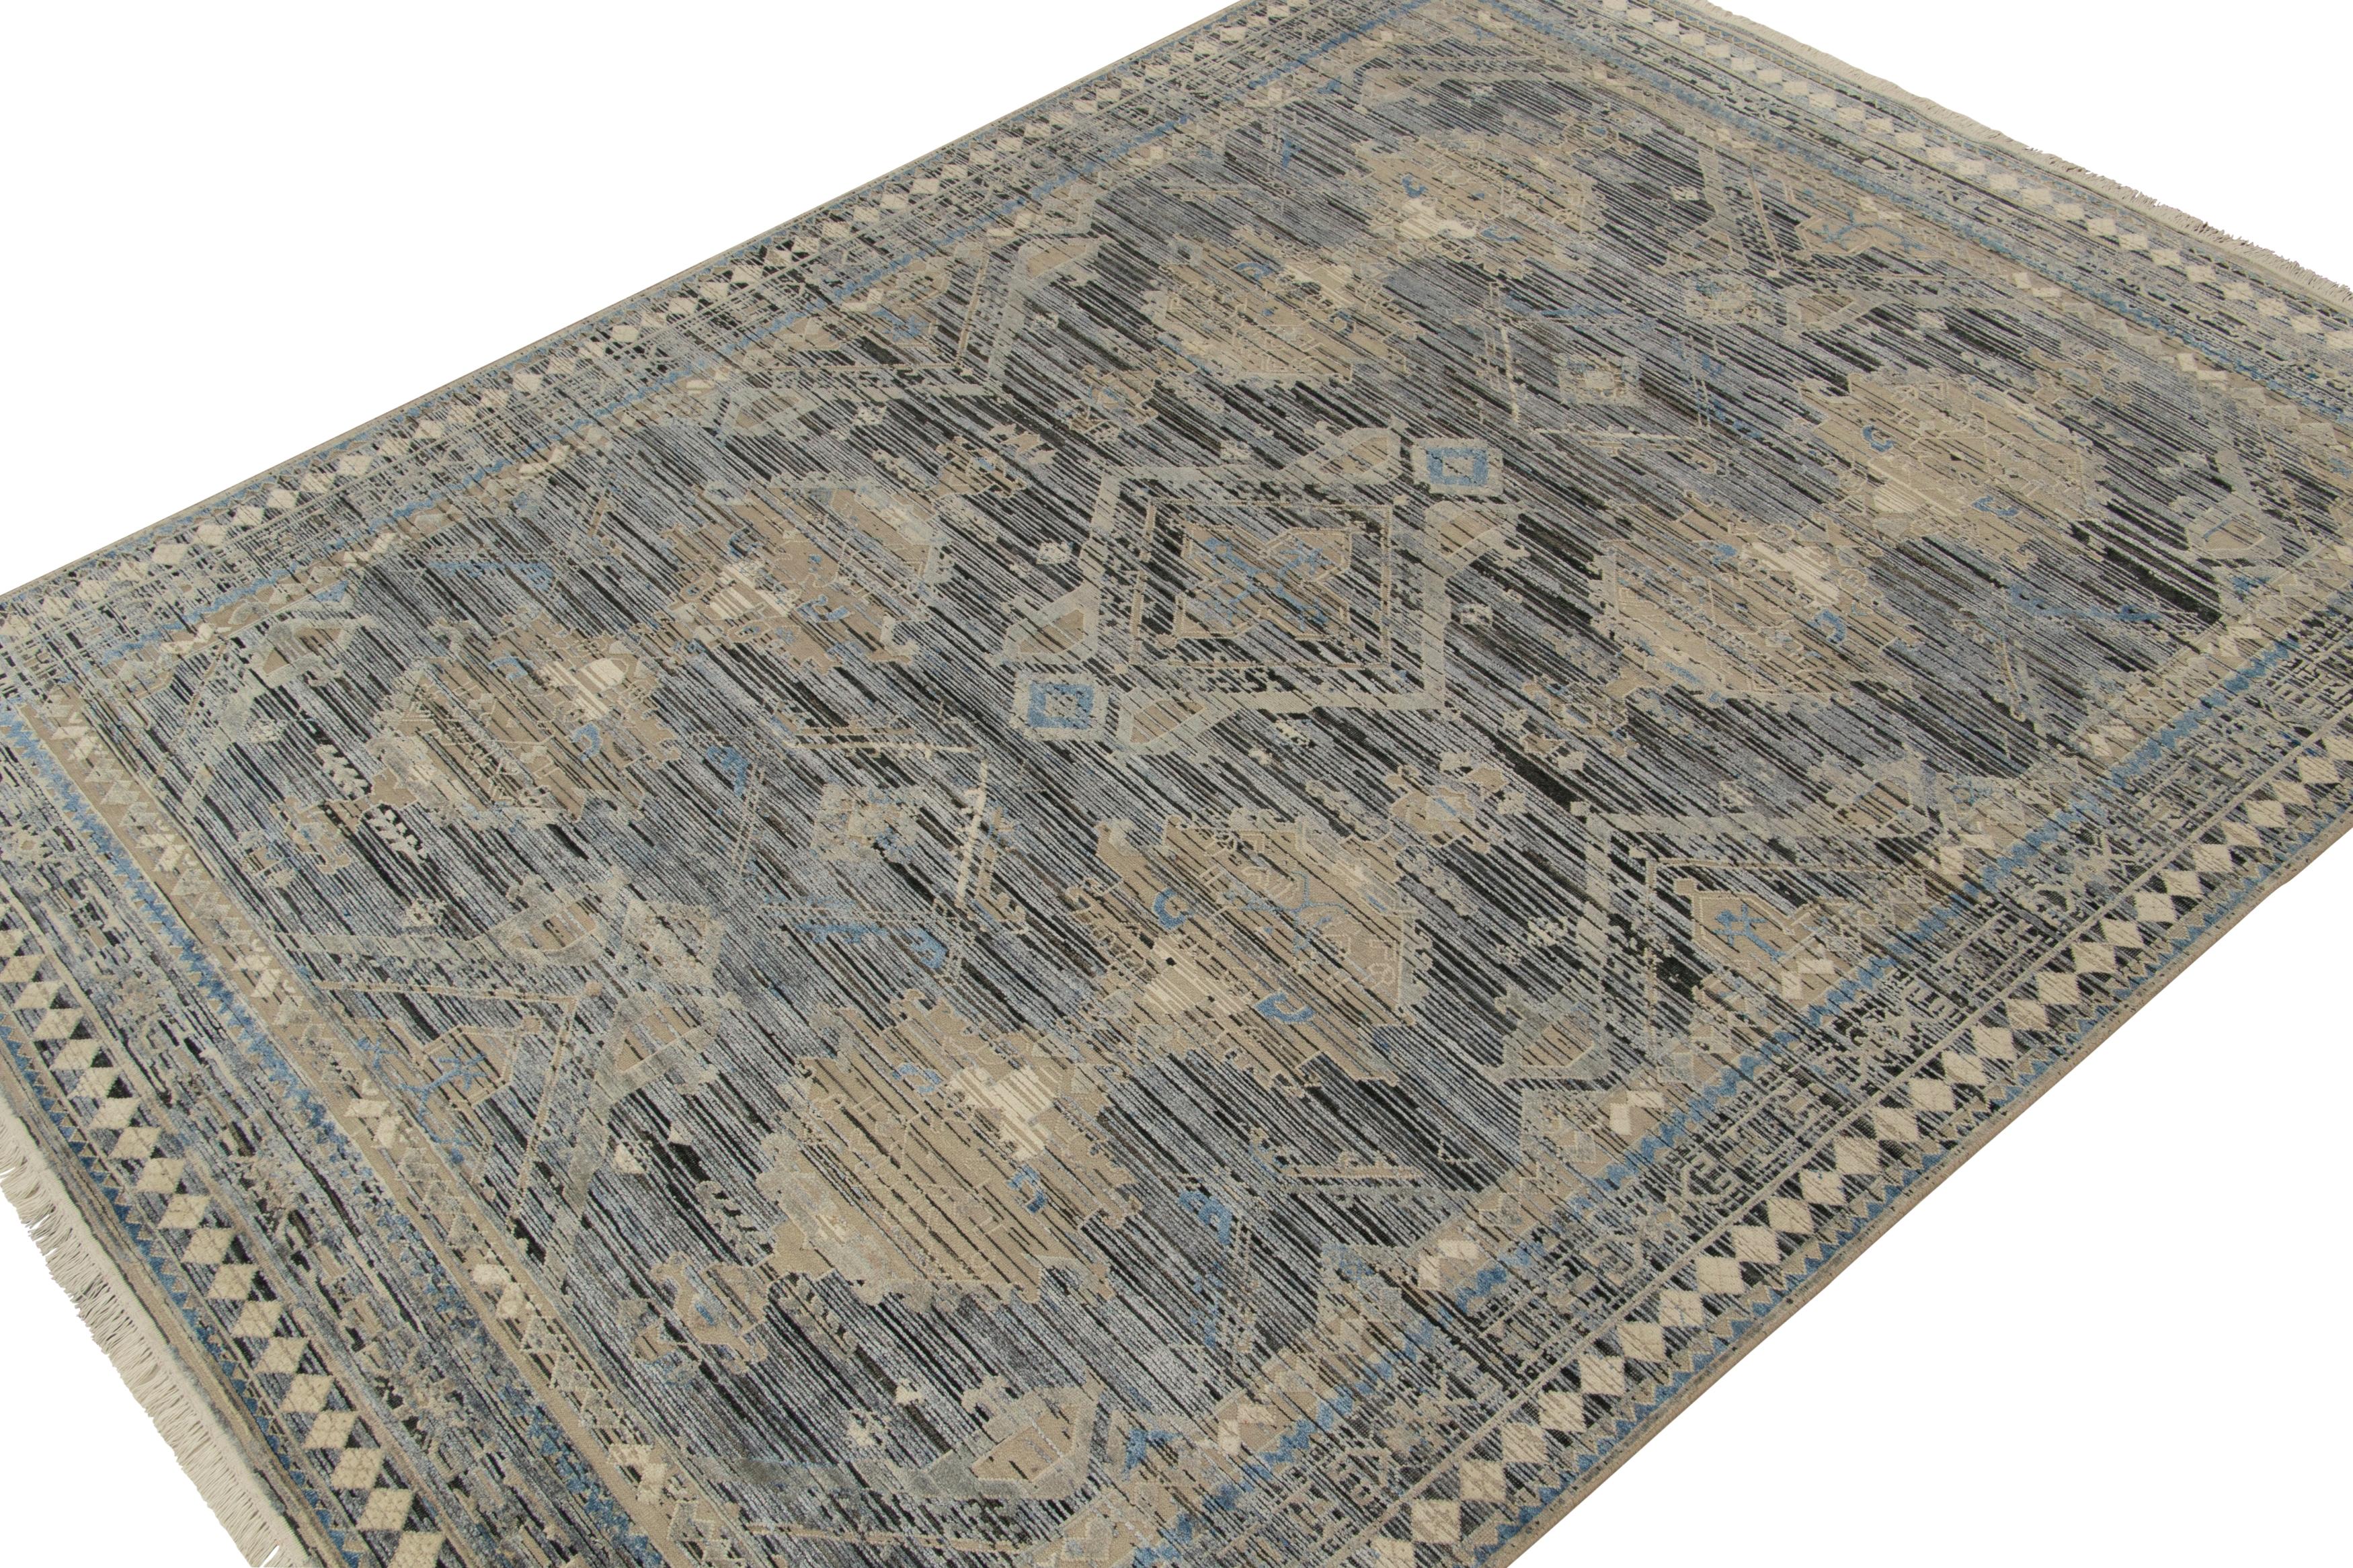 A 9x12 rug inspired from antique Persian rug styles, from Rug & Kilim’s Modern Classics Collection. Hand knotted in wool & silk, playing exceptional modern tones of blue, beige and silver-gray in graceful classic patterns.

Further On the